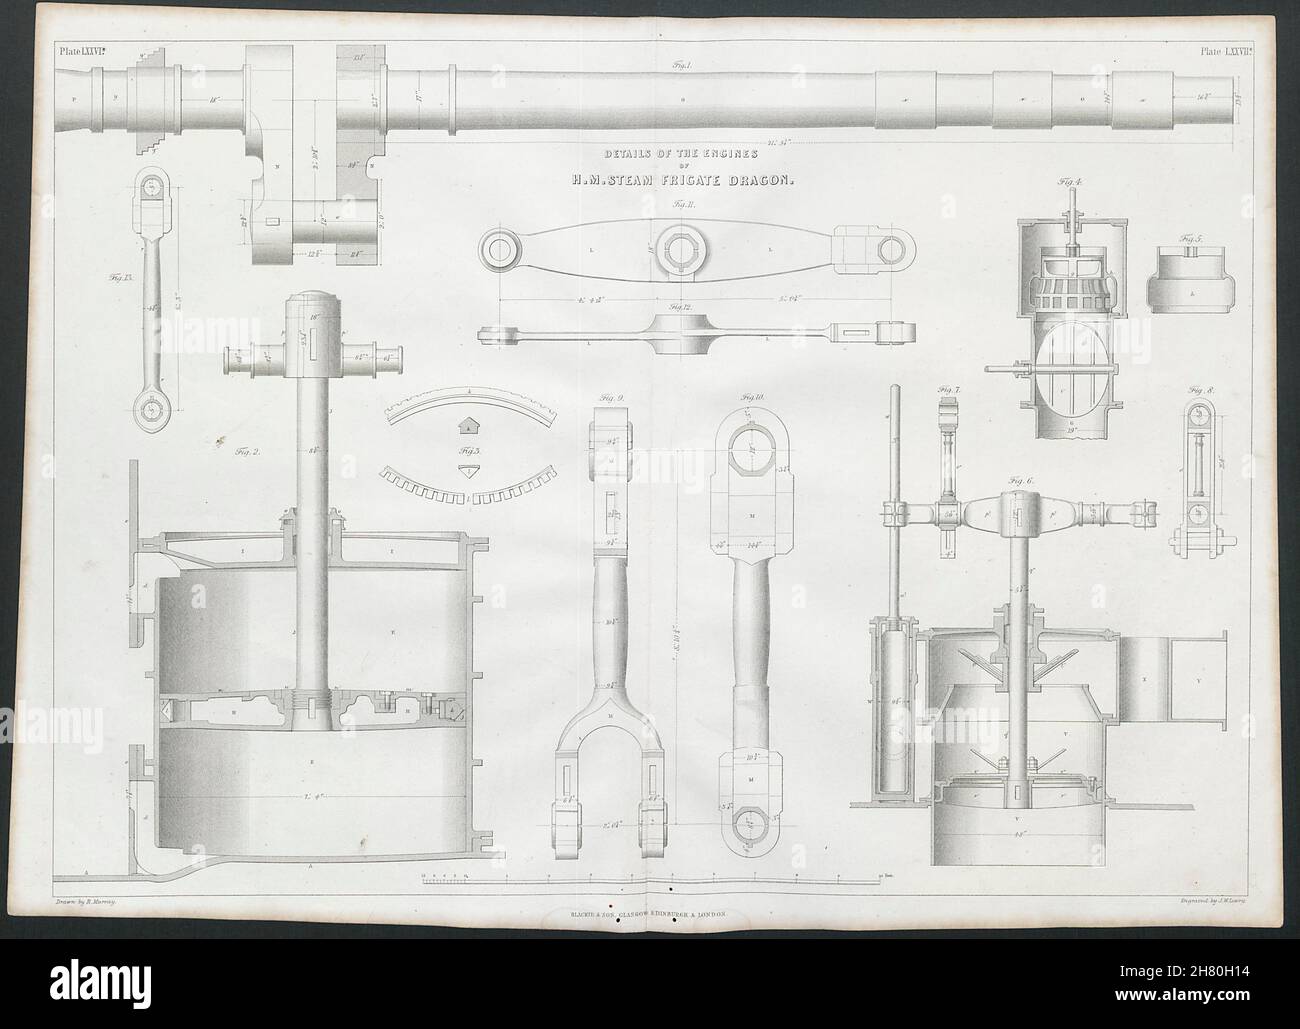 VICTORIAN ENGINEERING DRAWING HM Steam Frigate Dragon's engines detail 1847 Stock Photo